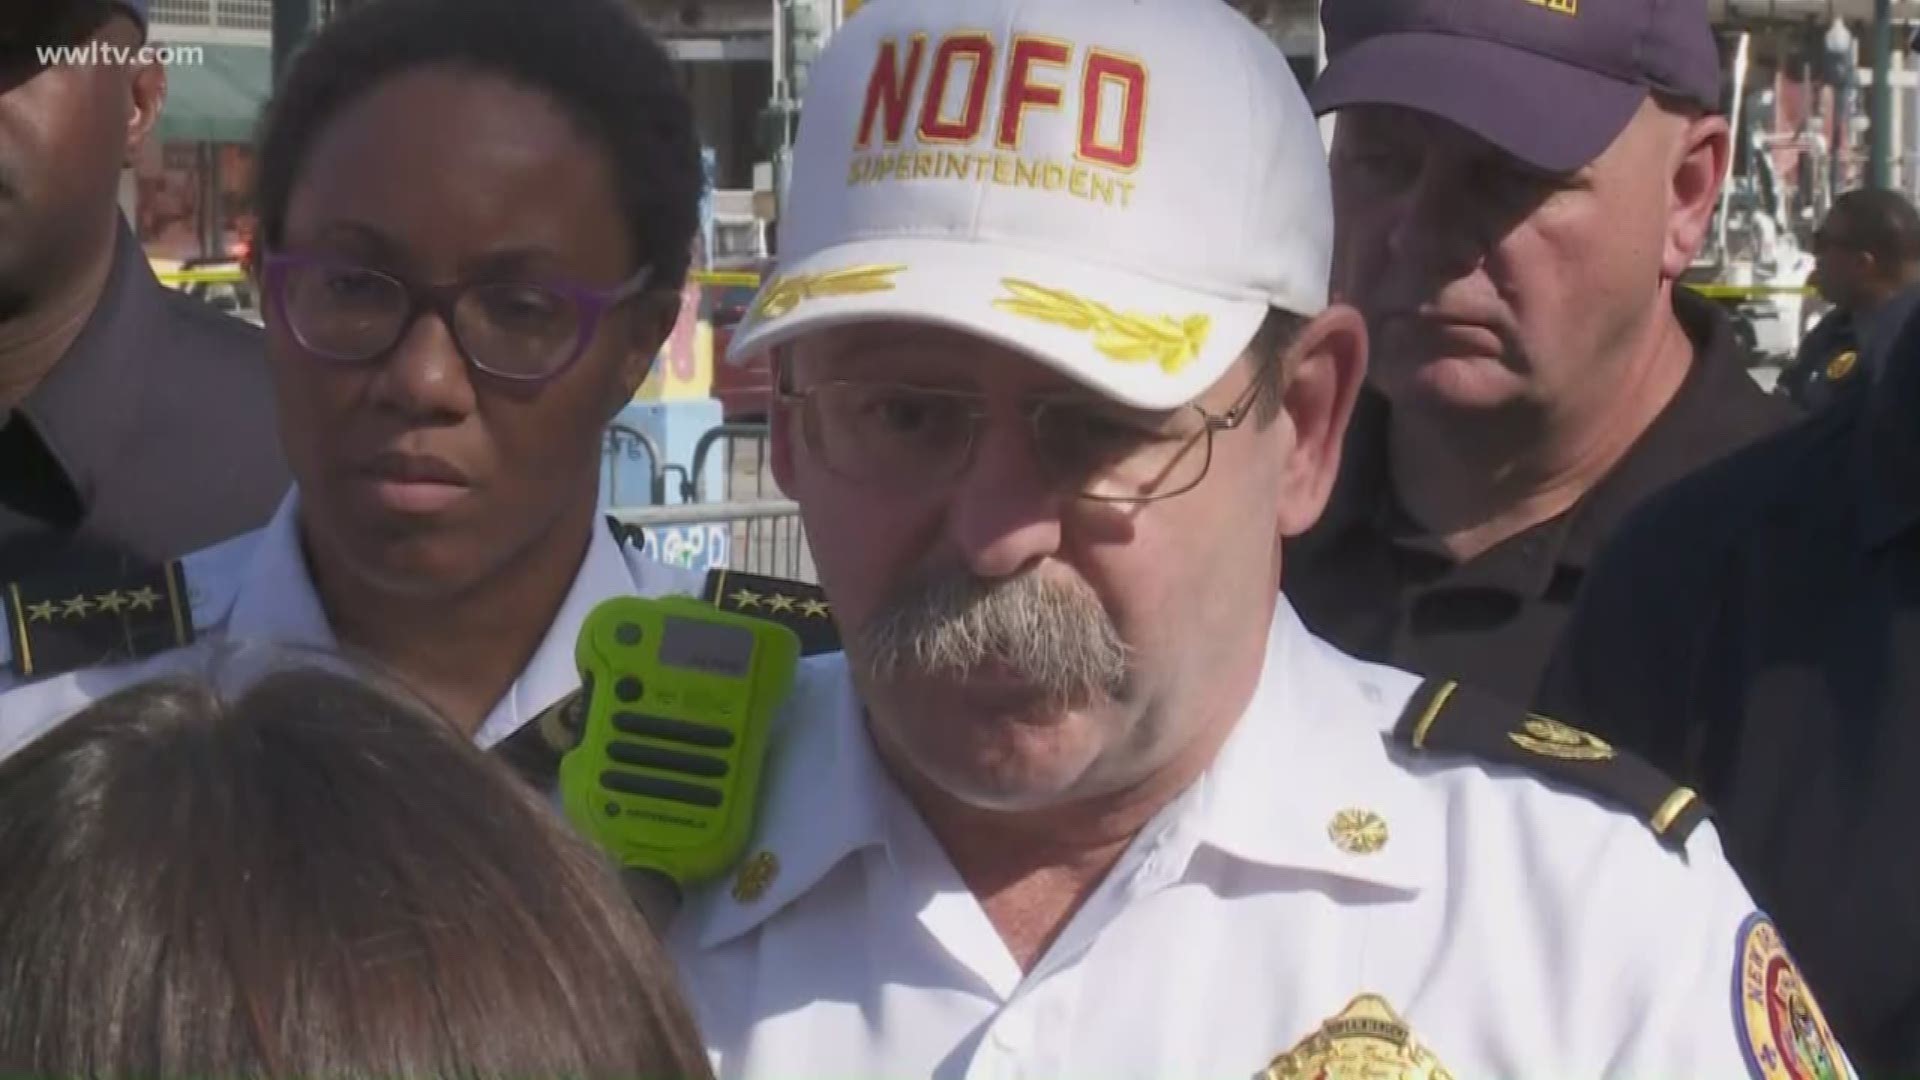 New Orleans Fire Dept., Office of Homeland Security and other first responders update on the hotel collapse and search for those who are missing.